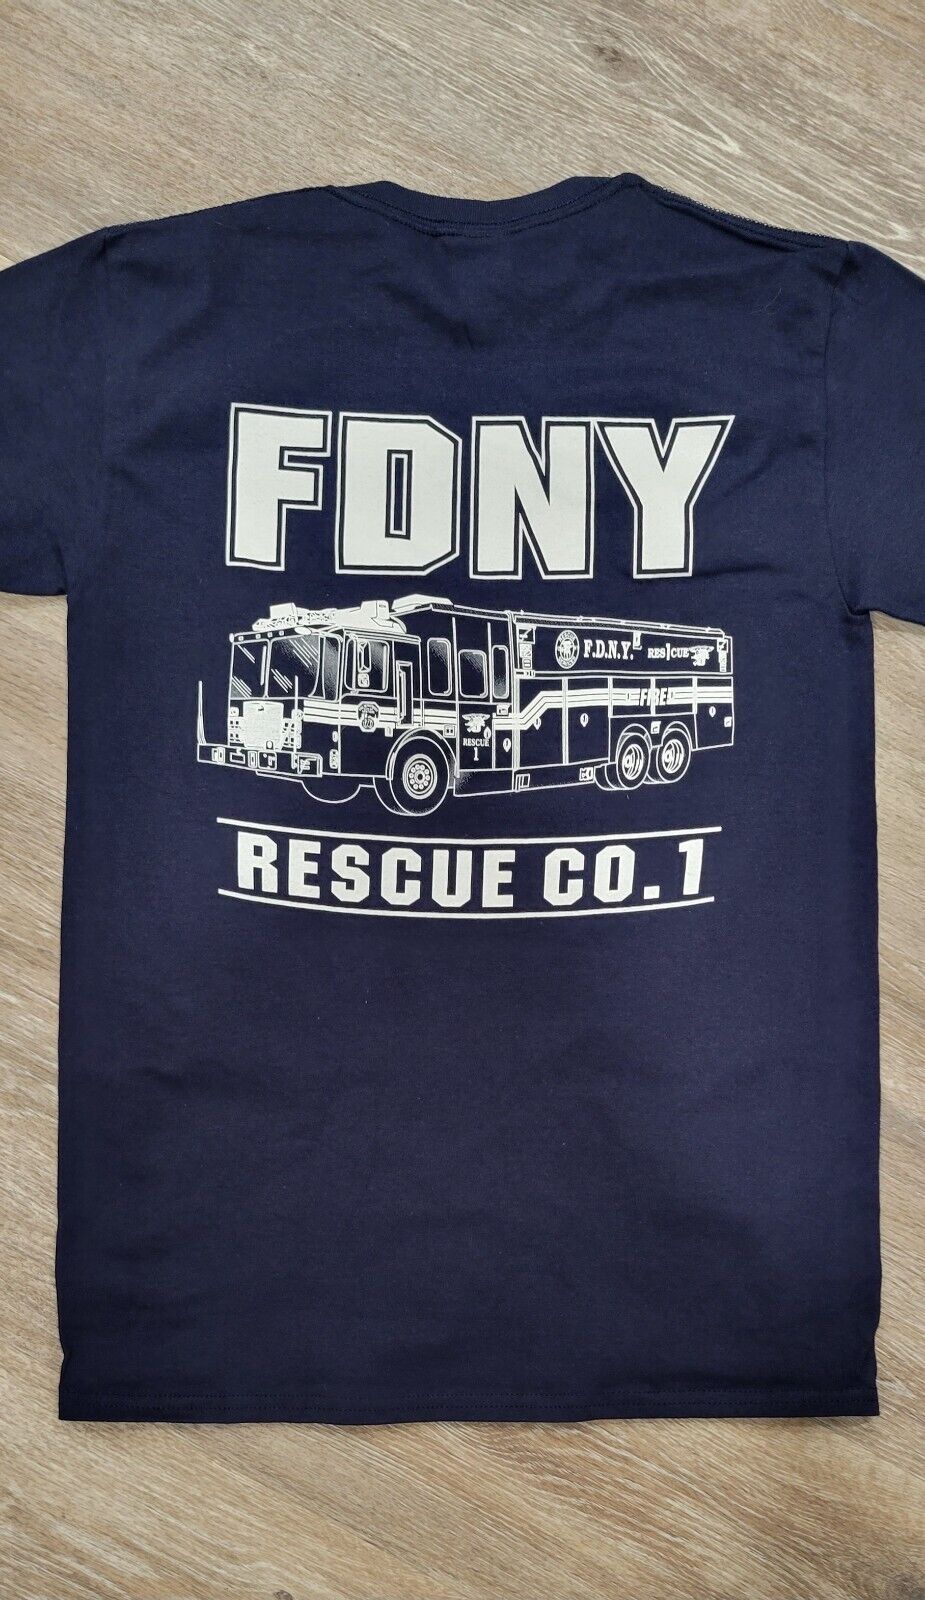 NEW Vintage FDNY Firefighter shirt NYC Rescue Co 1 Truck Fire department